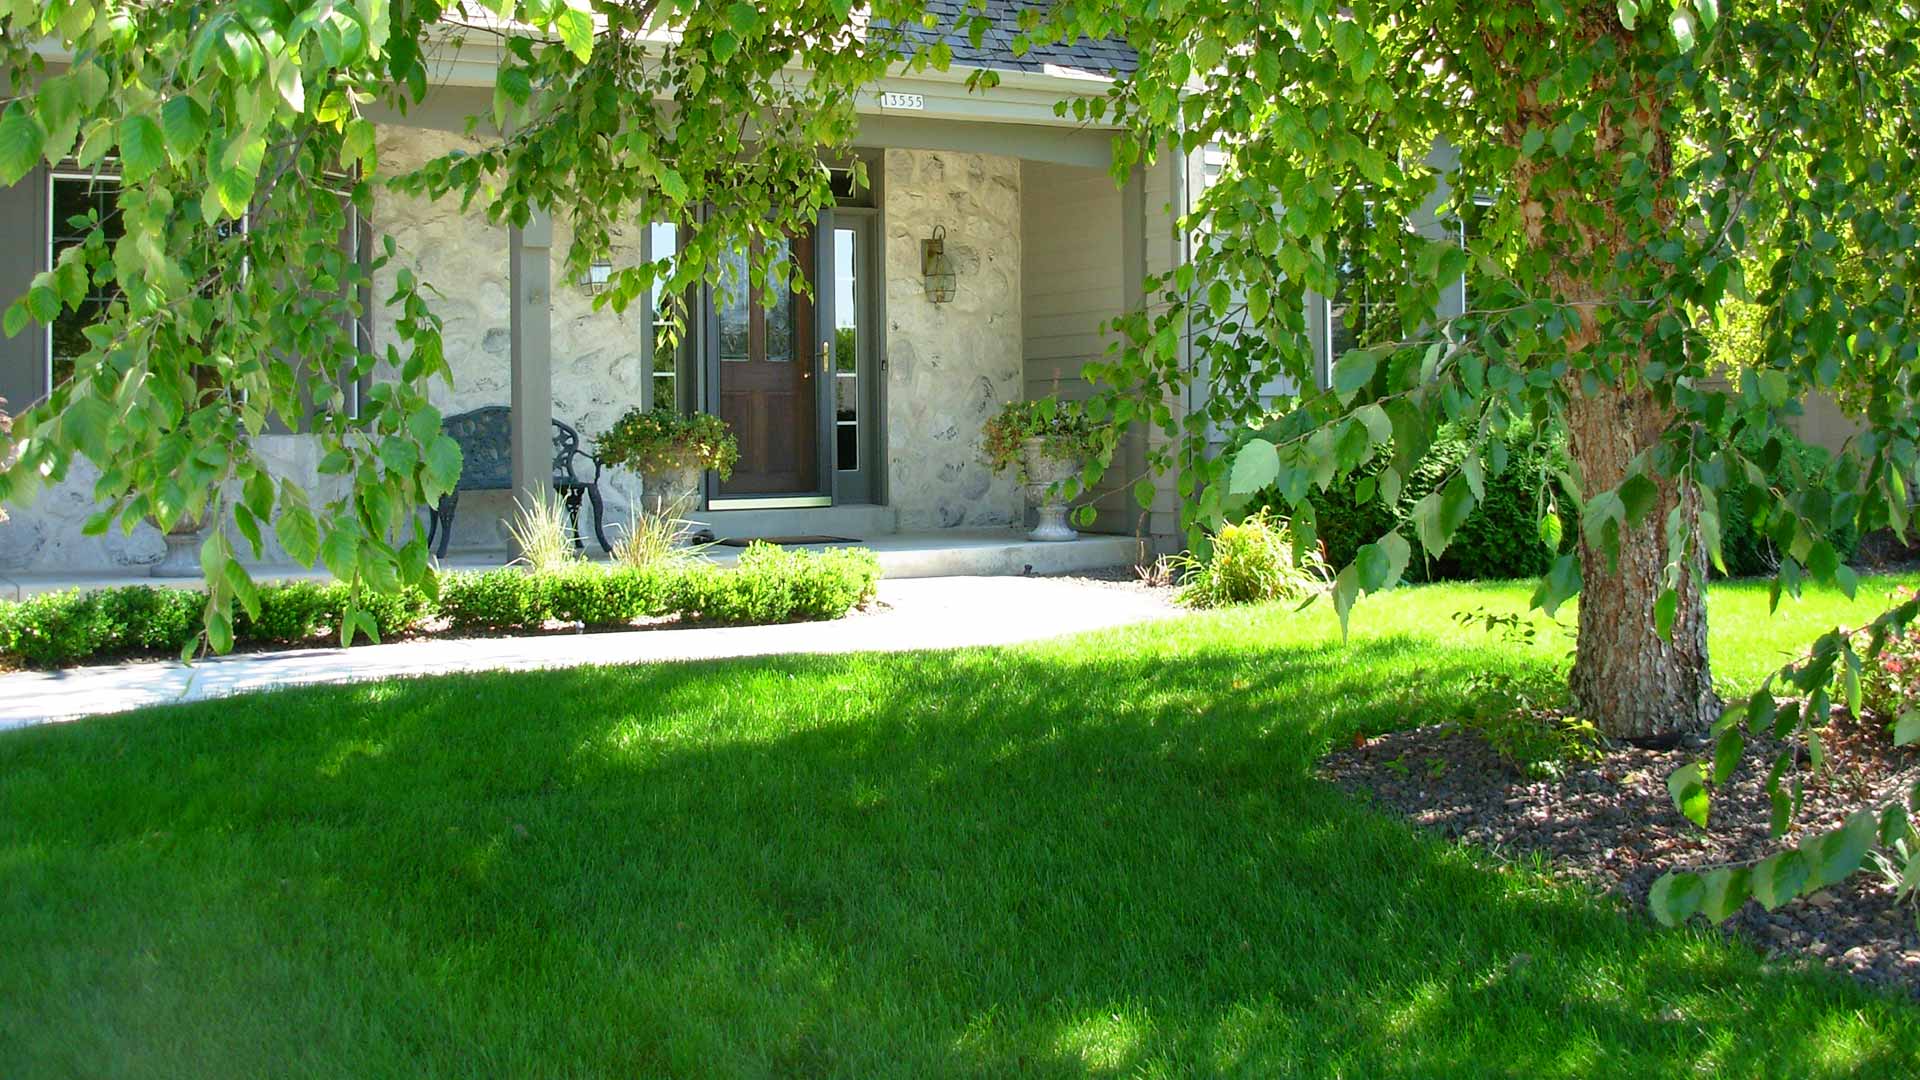 A yard cleanup was performed for this property, and the results are a well manicured lawn with no yard debris.